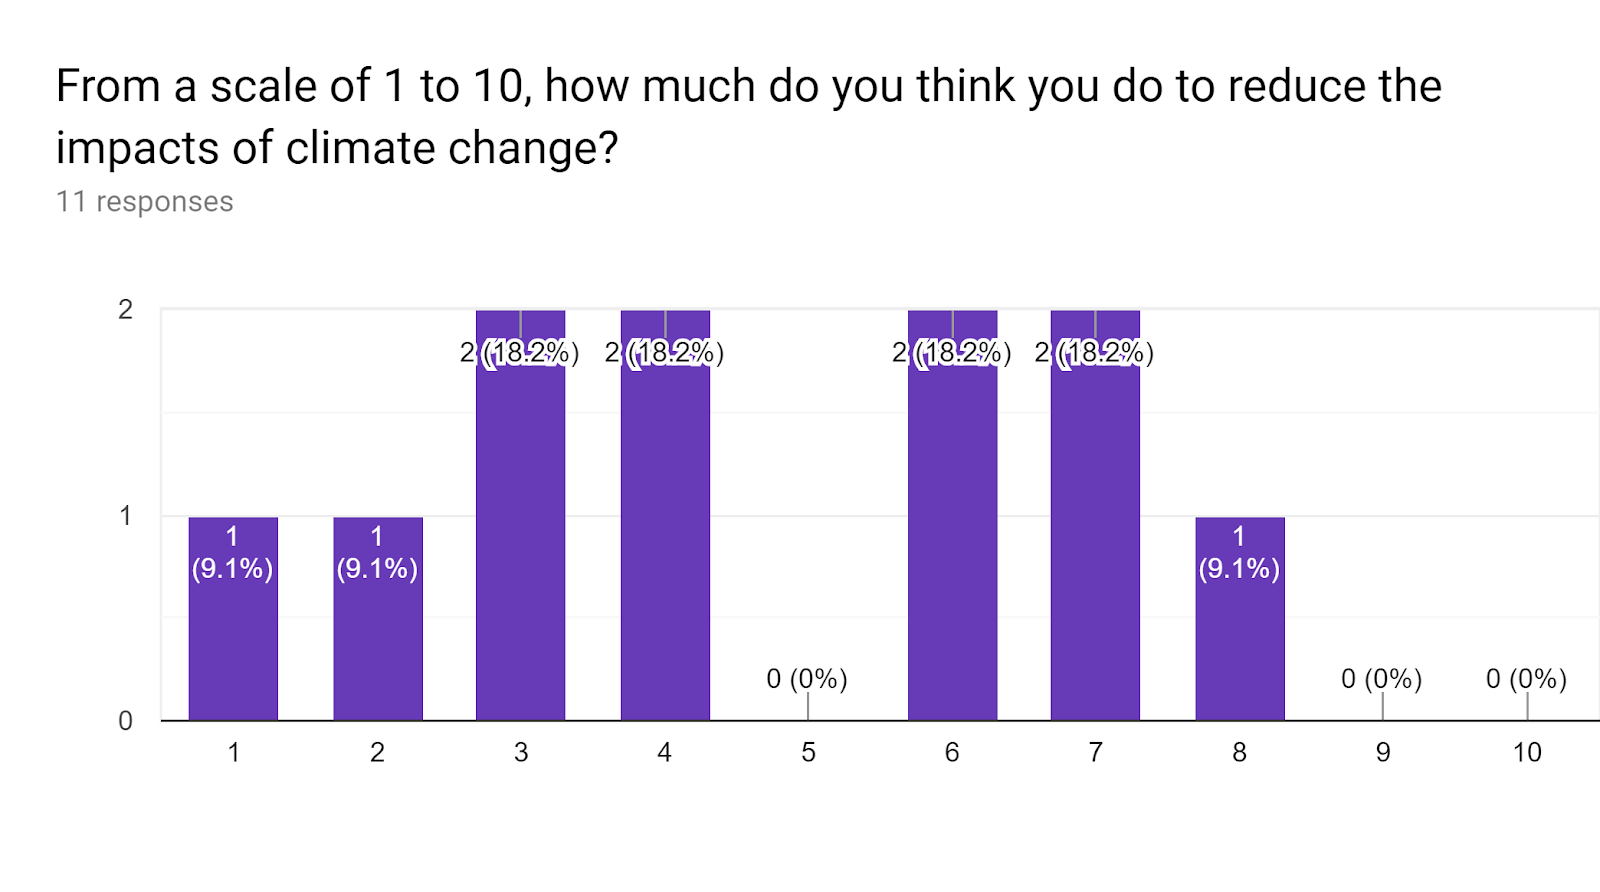 Forms response chart. Question title: From a scale of 1 to 10, how much do you think you do to reduce the impacts of climate change?. Number of responses: 11 responses.